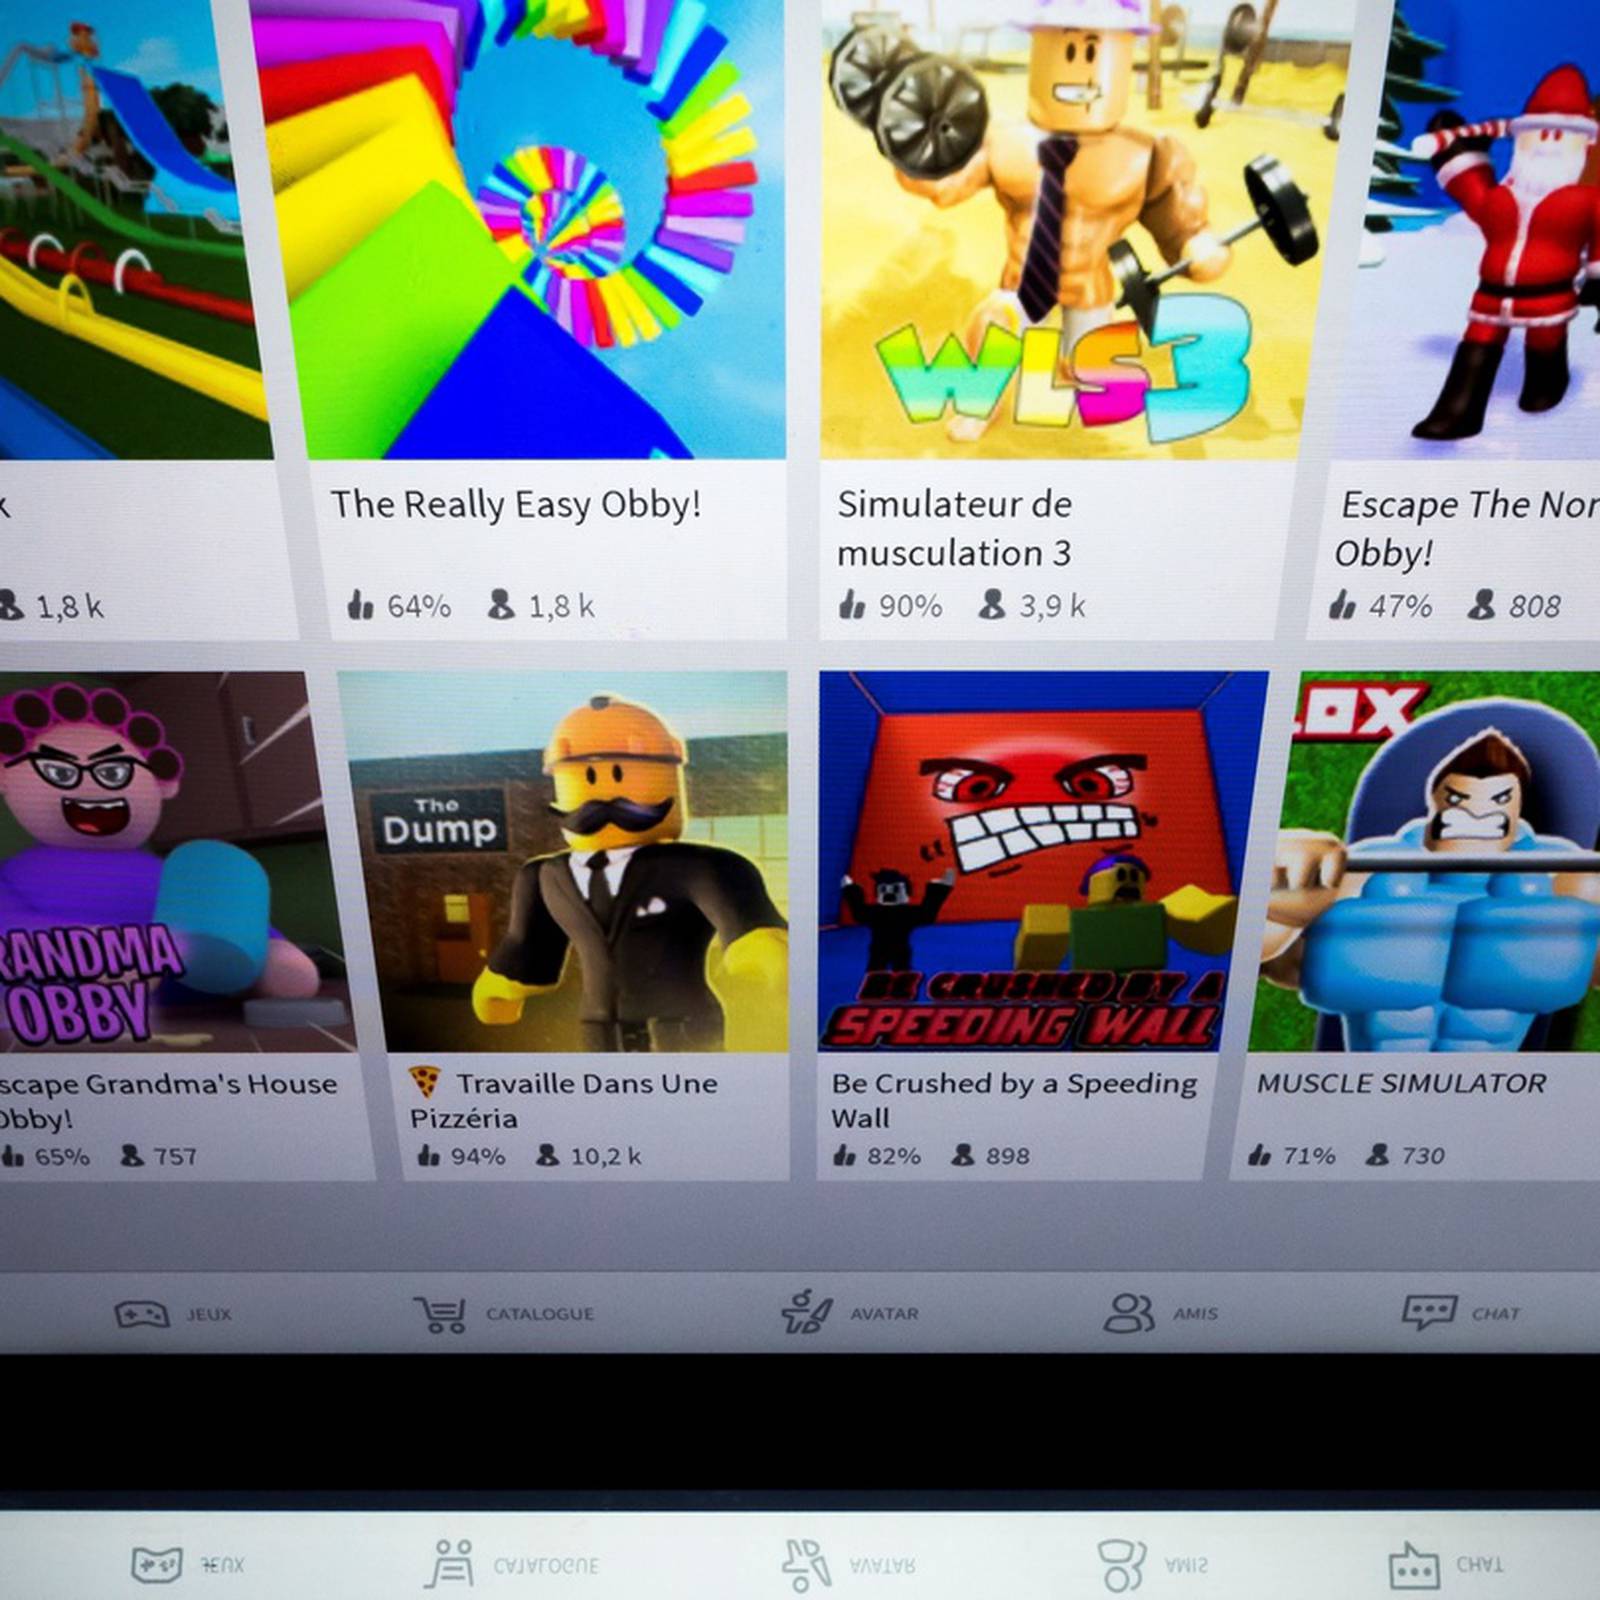 Numbers playing preteen video game Roblox surge during Covid-19 lockdowns –  The Irish Times